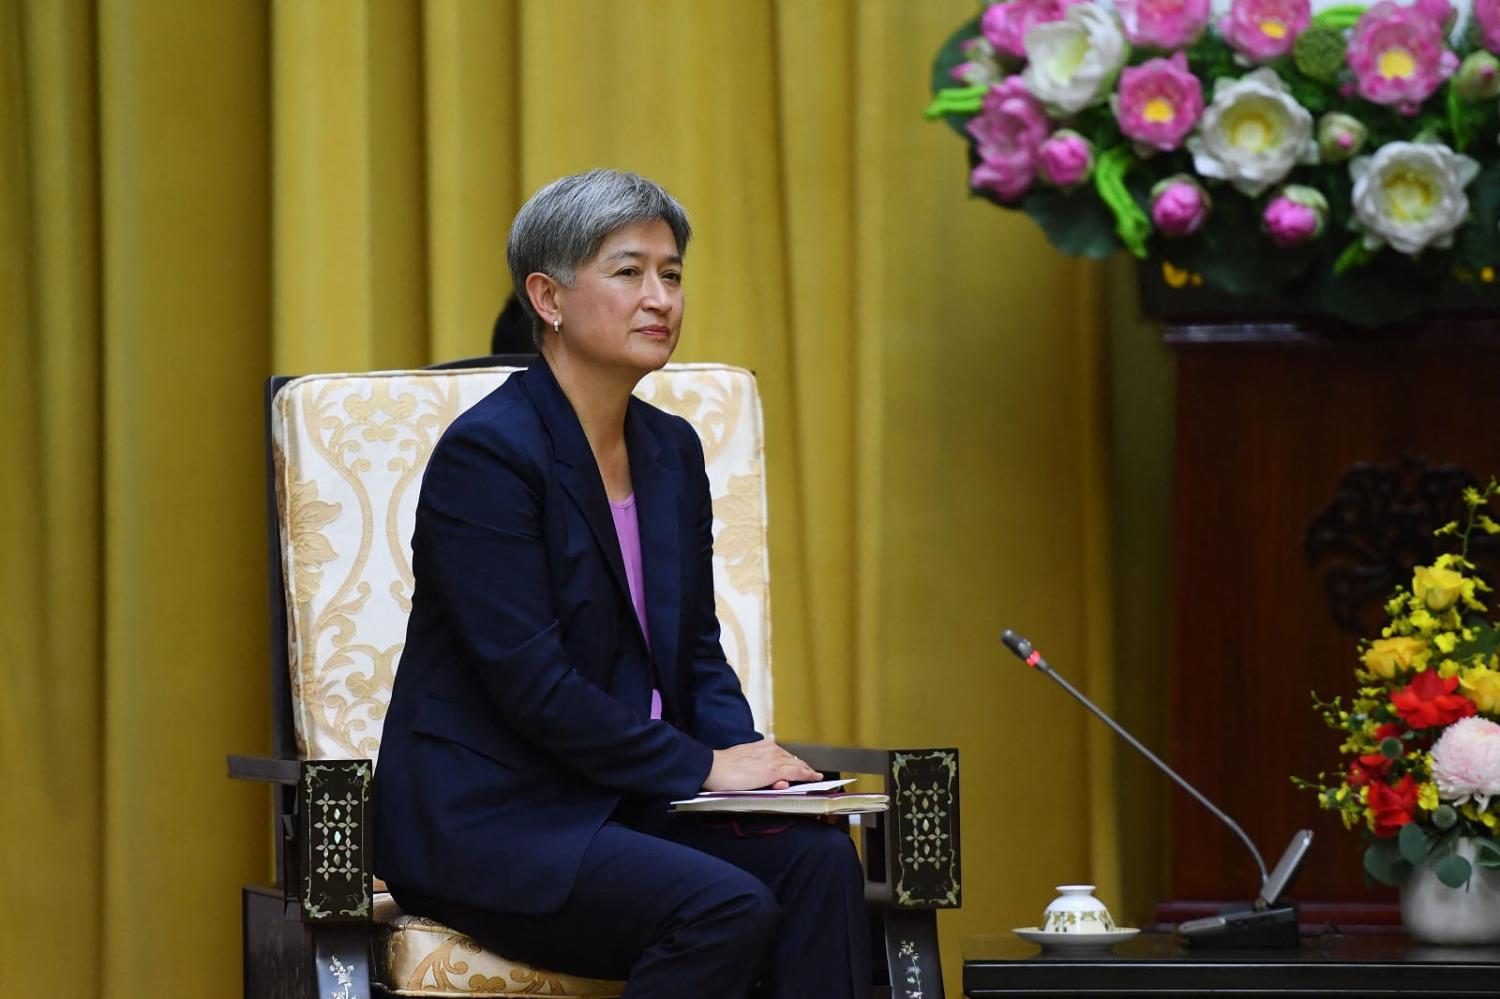 Australia’s Foreign Minister Penny Wong takes part in a meeting with Vietnam’s President Nguyen Xuan Phuc, Hanoi, 27 June 2022 (Nhac Nguyen/AFP via Getty Images)